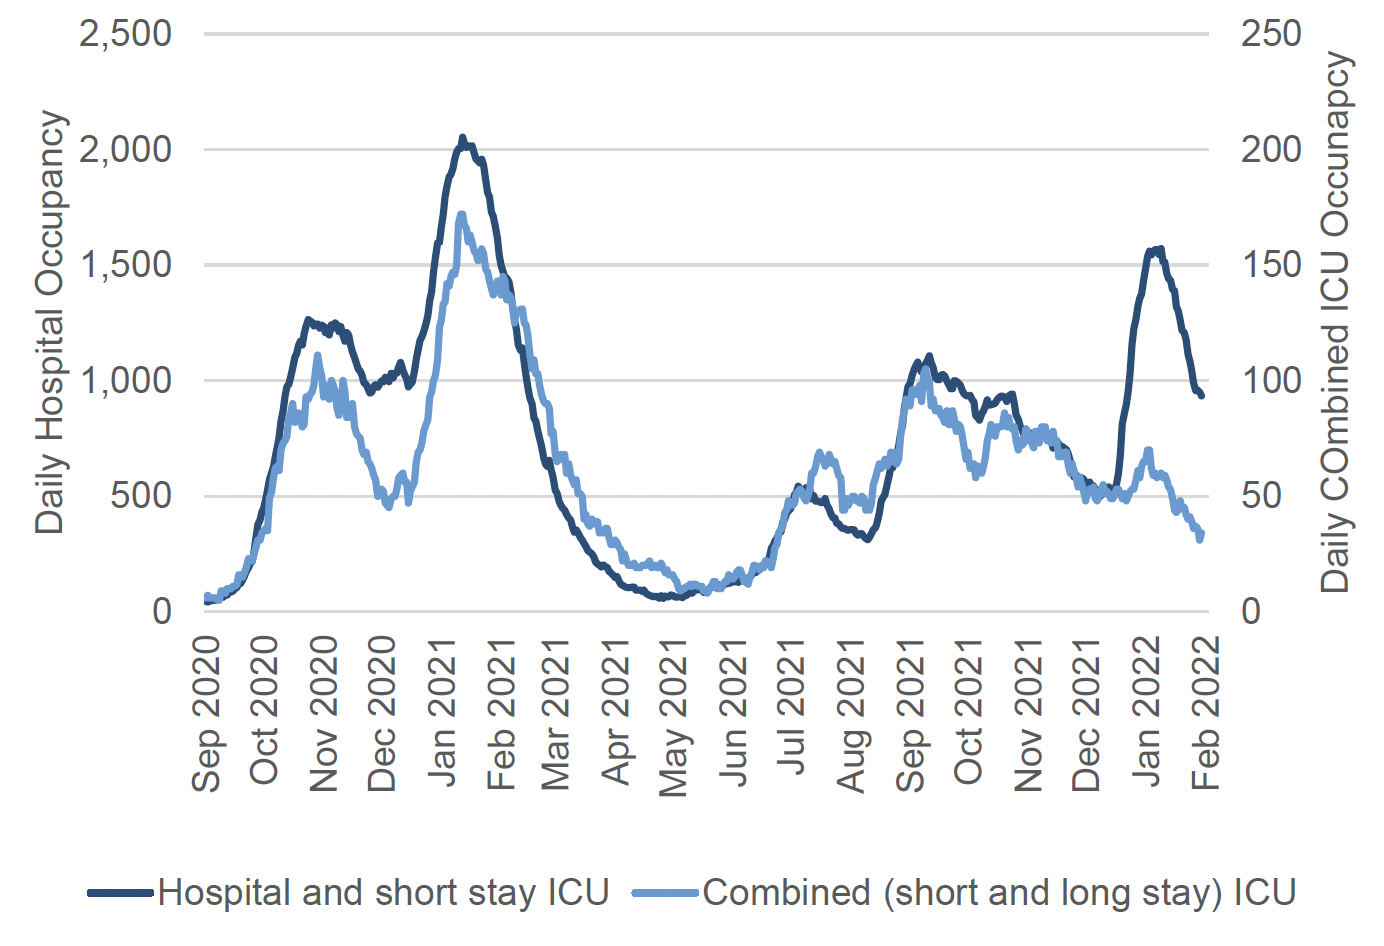 A line chart showing one line with the daily hospital occupancy (including short stay ICU) against the left axis, on a scale from 0 to 2,500, and a line with ICU/HDU (including long and short stay) against the right axis, on a scale from 0 to 150, with recently confirmed Covid-19 since September 2020 until early February 2022. The number of Covid-19 patients in hospital peaked in November 2020, January 2021, July 2021, September 2021, and January 2022. The number of Covid ICU patients peaked in November 2020 and January 2021, September 2021 and then decreased since then with some fluctuations. 